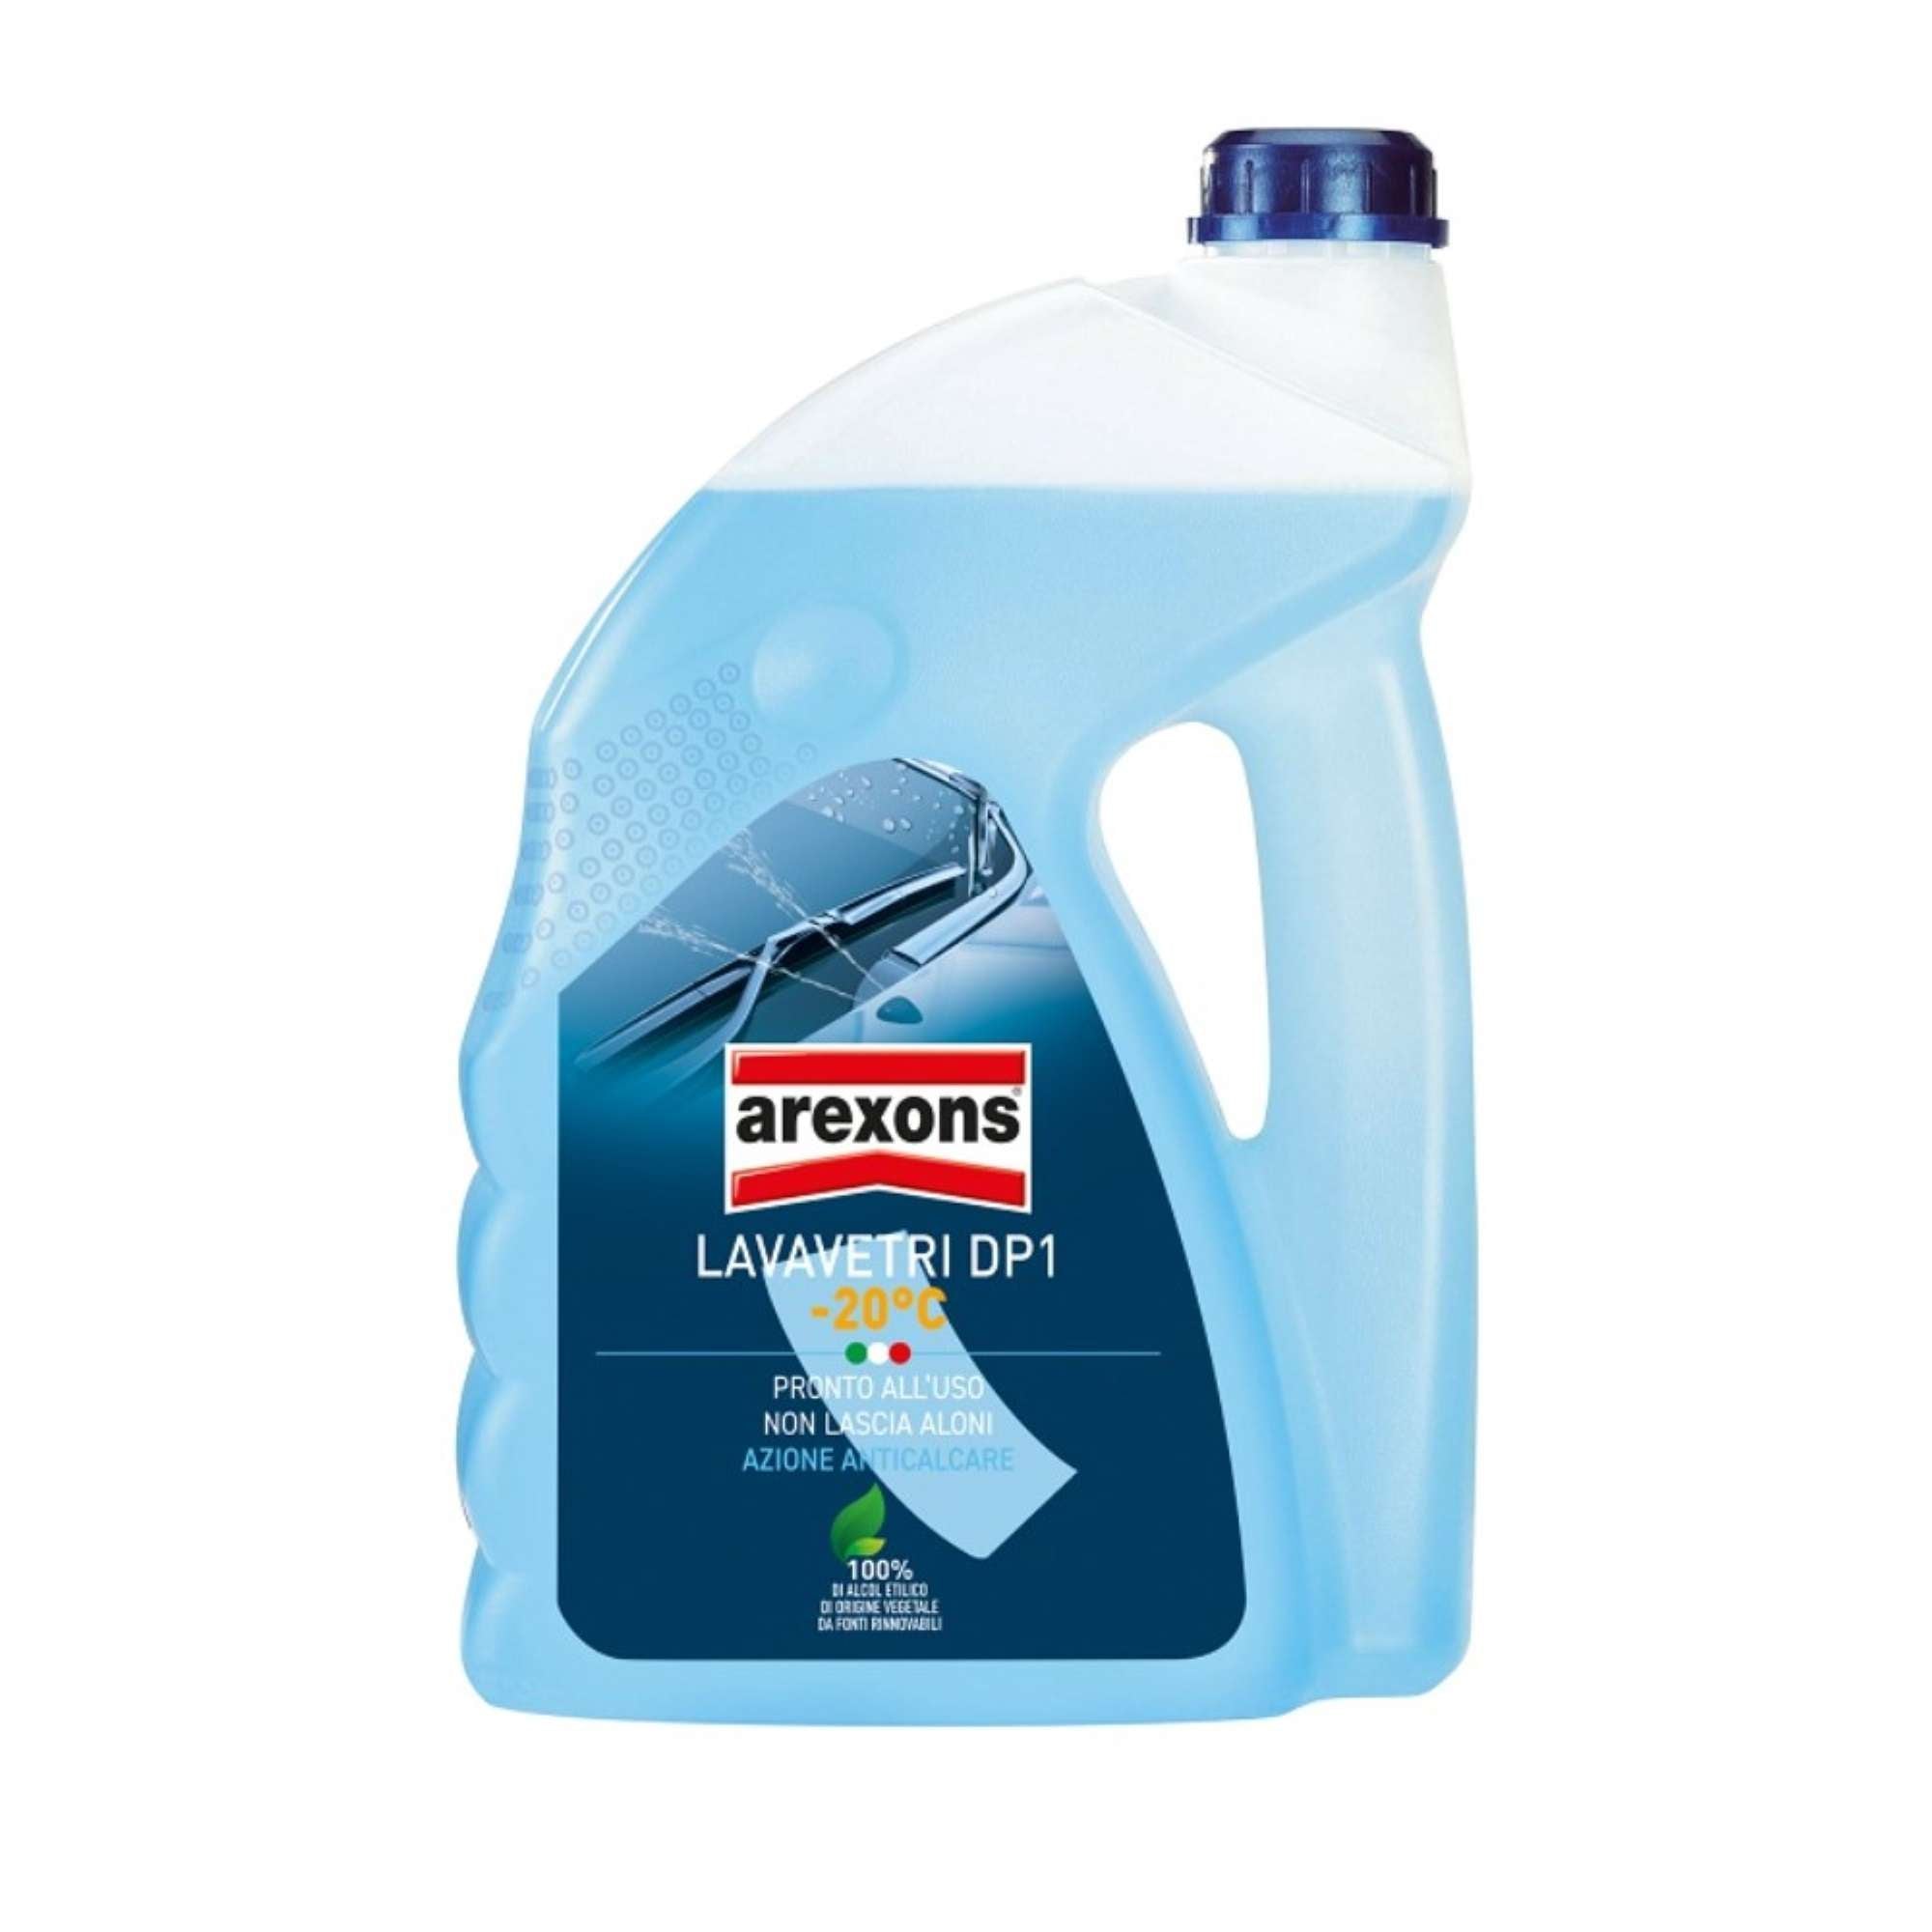 DP1 windshield washer fluid ready to use winter 4.5 liters - Arexons 8415